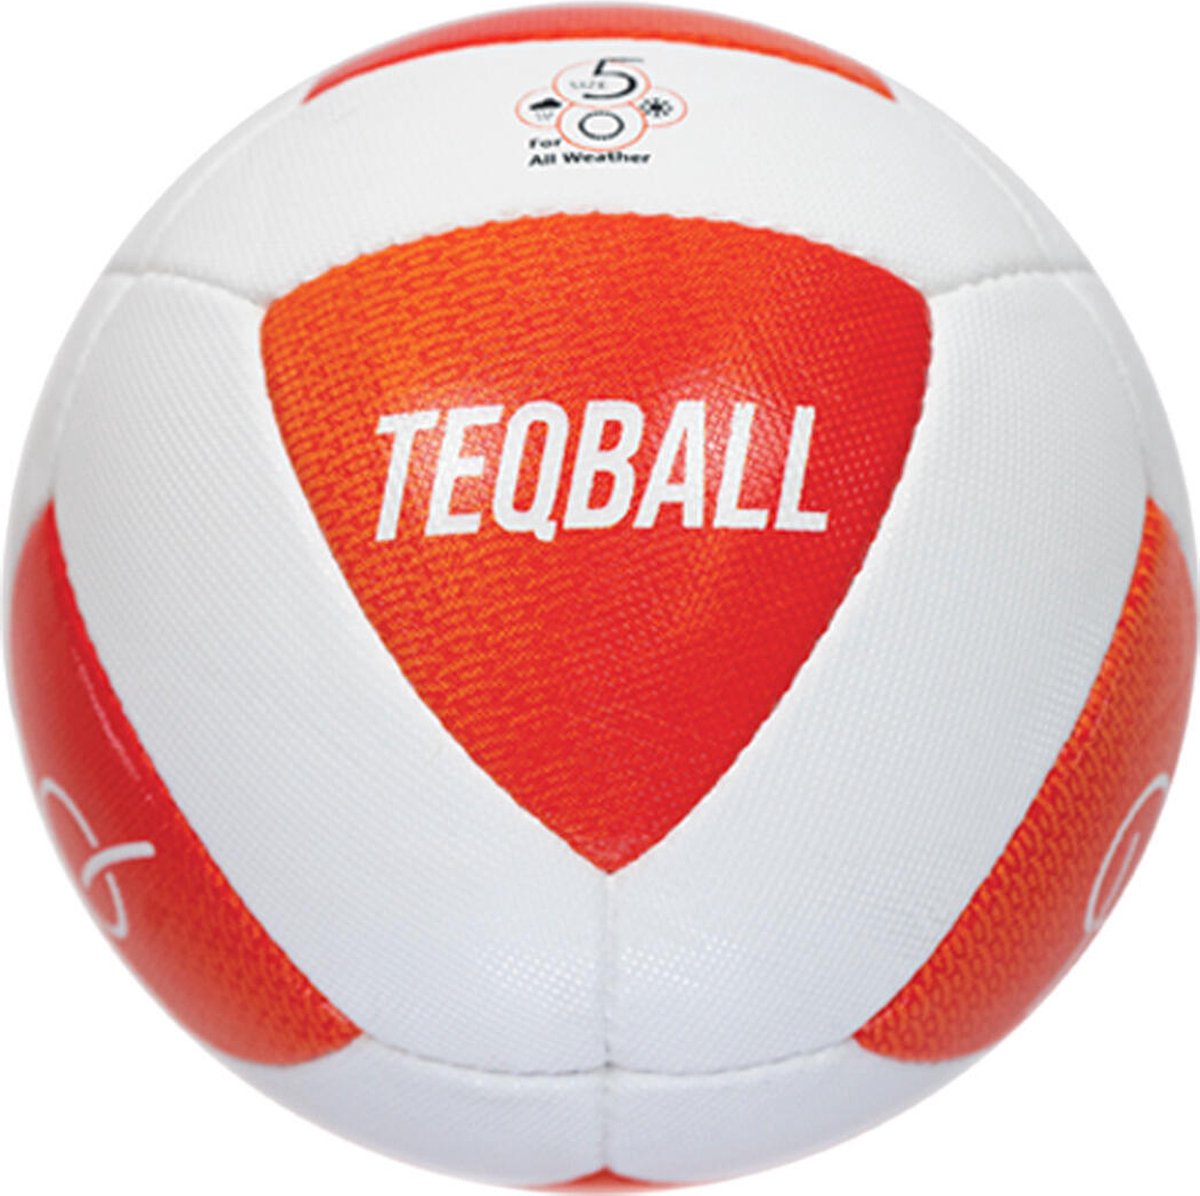 TEQBALL Official Voetbal ,Maat 5, Oranje/Wit